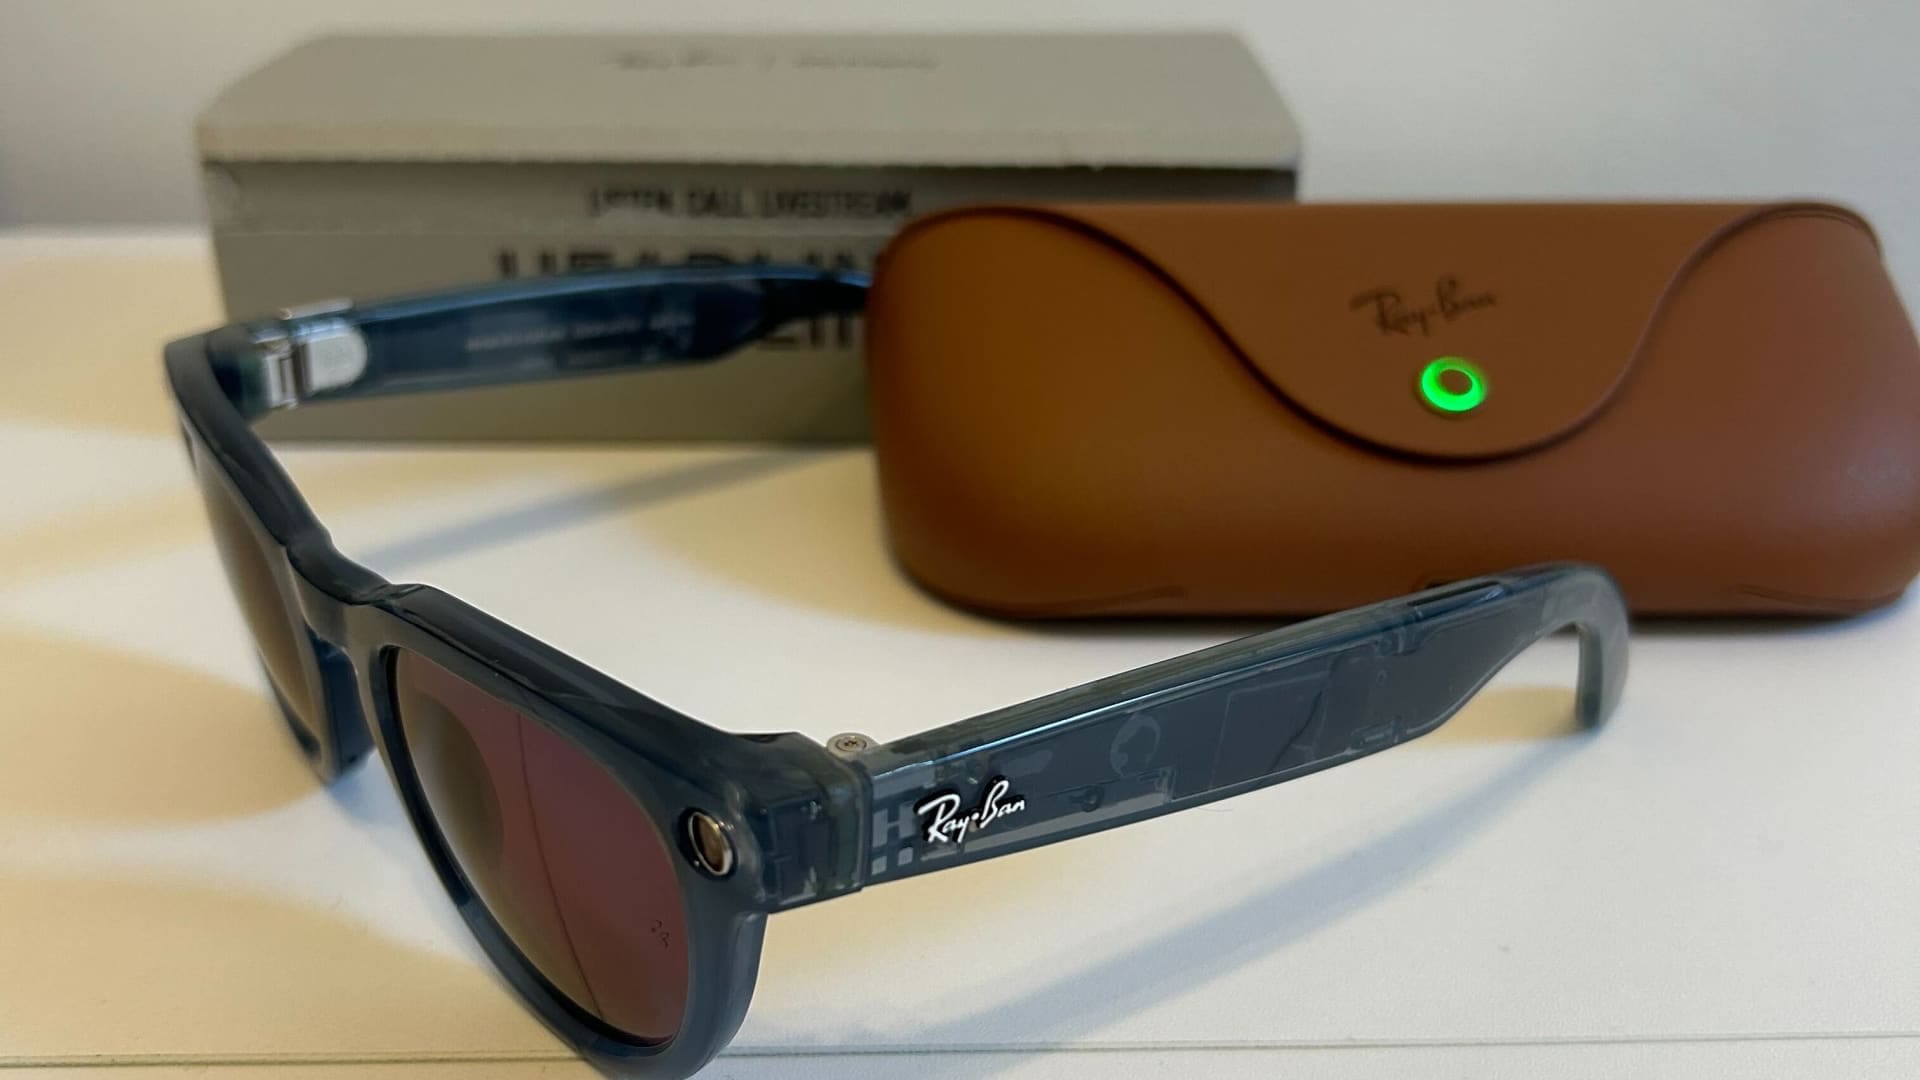 Meta's Second-Generation Ray-Ban Smart Glasses: A Blend of Style and Tech